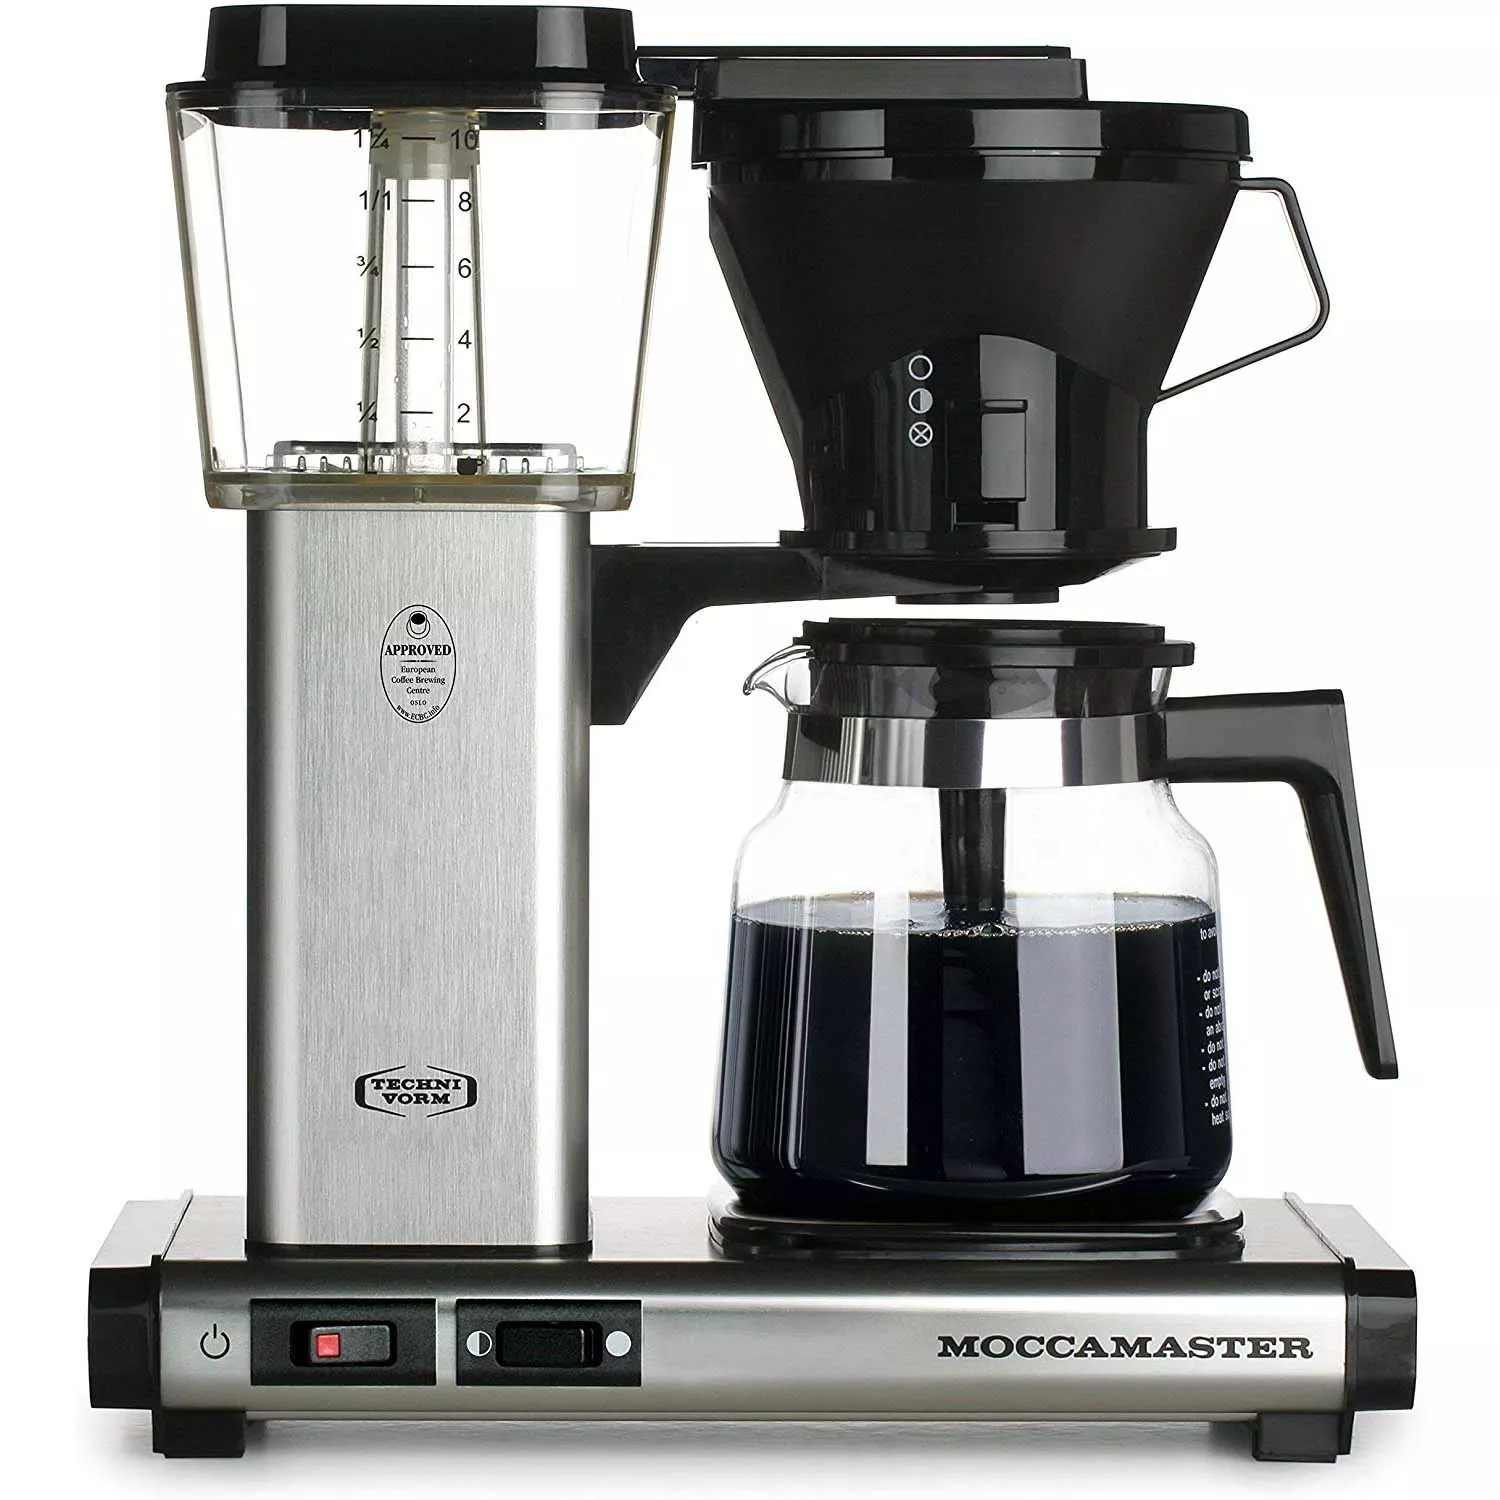 The Moccamaster Cup-One single serve coffee brewer